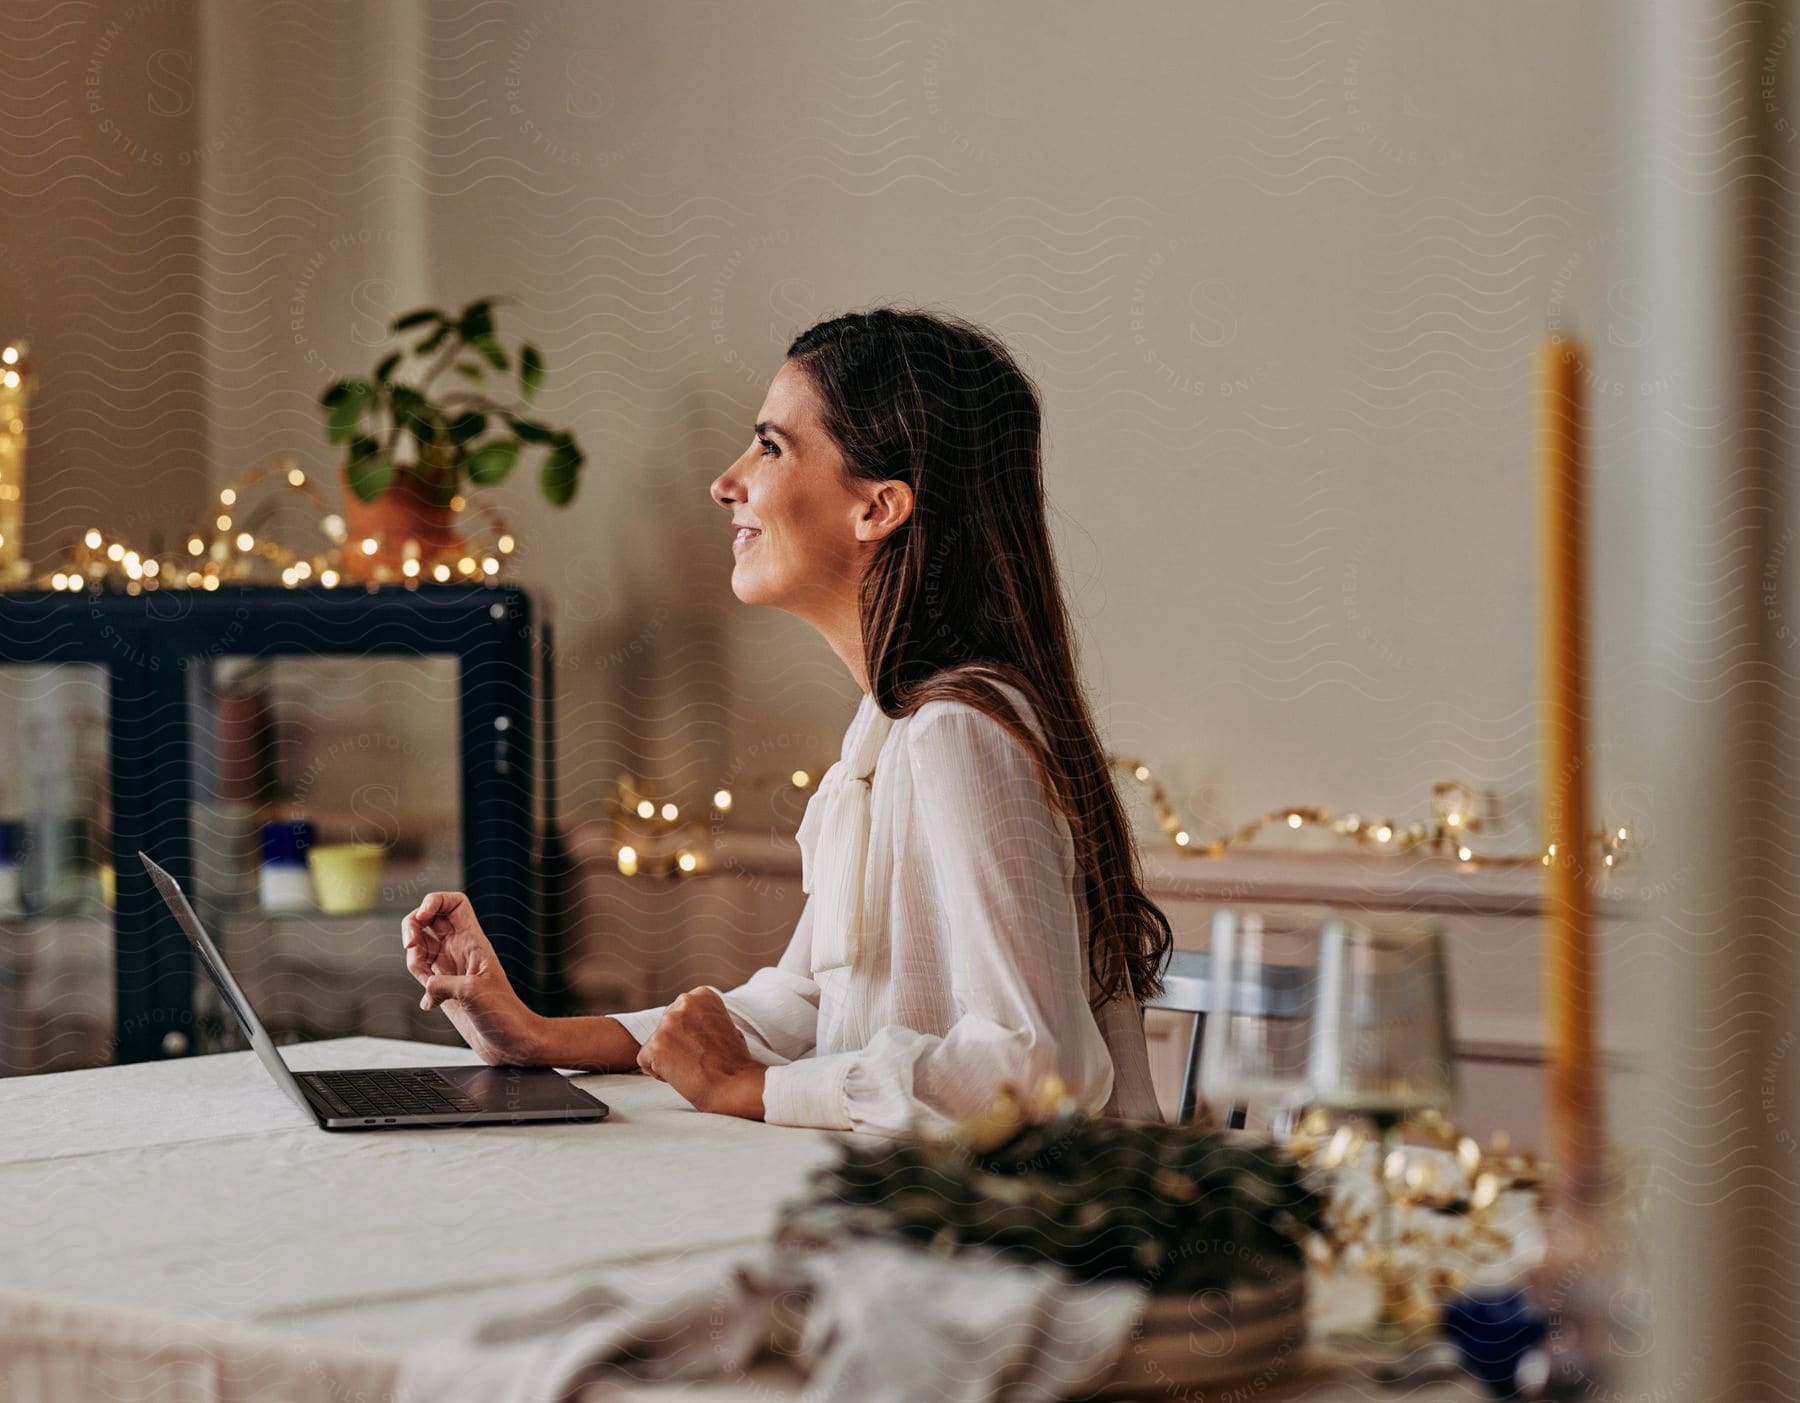 Stock photo of woman using laptop at table in brightly decorated room looks up with a smile.